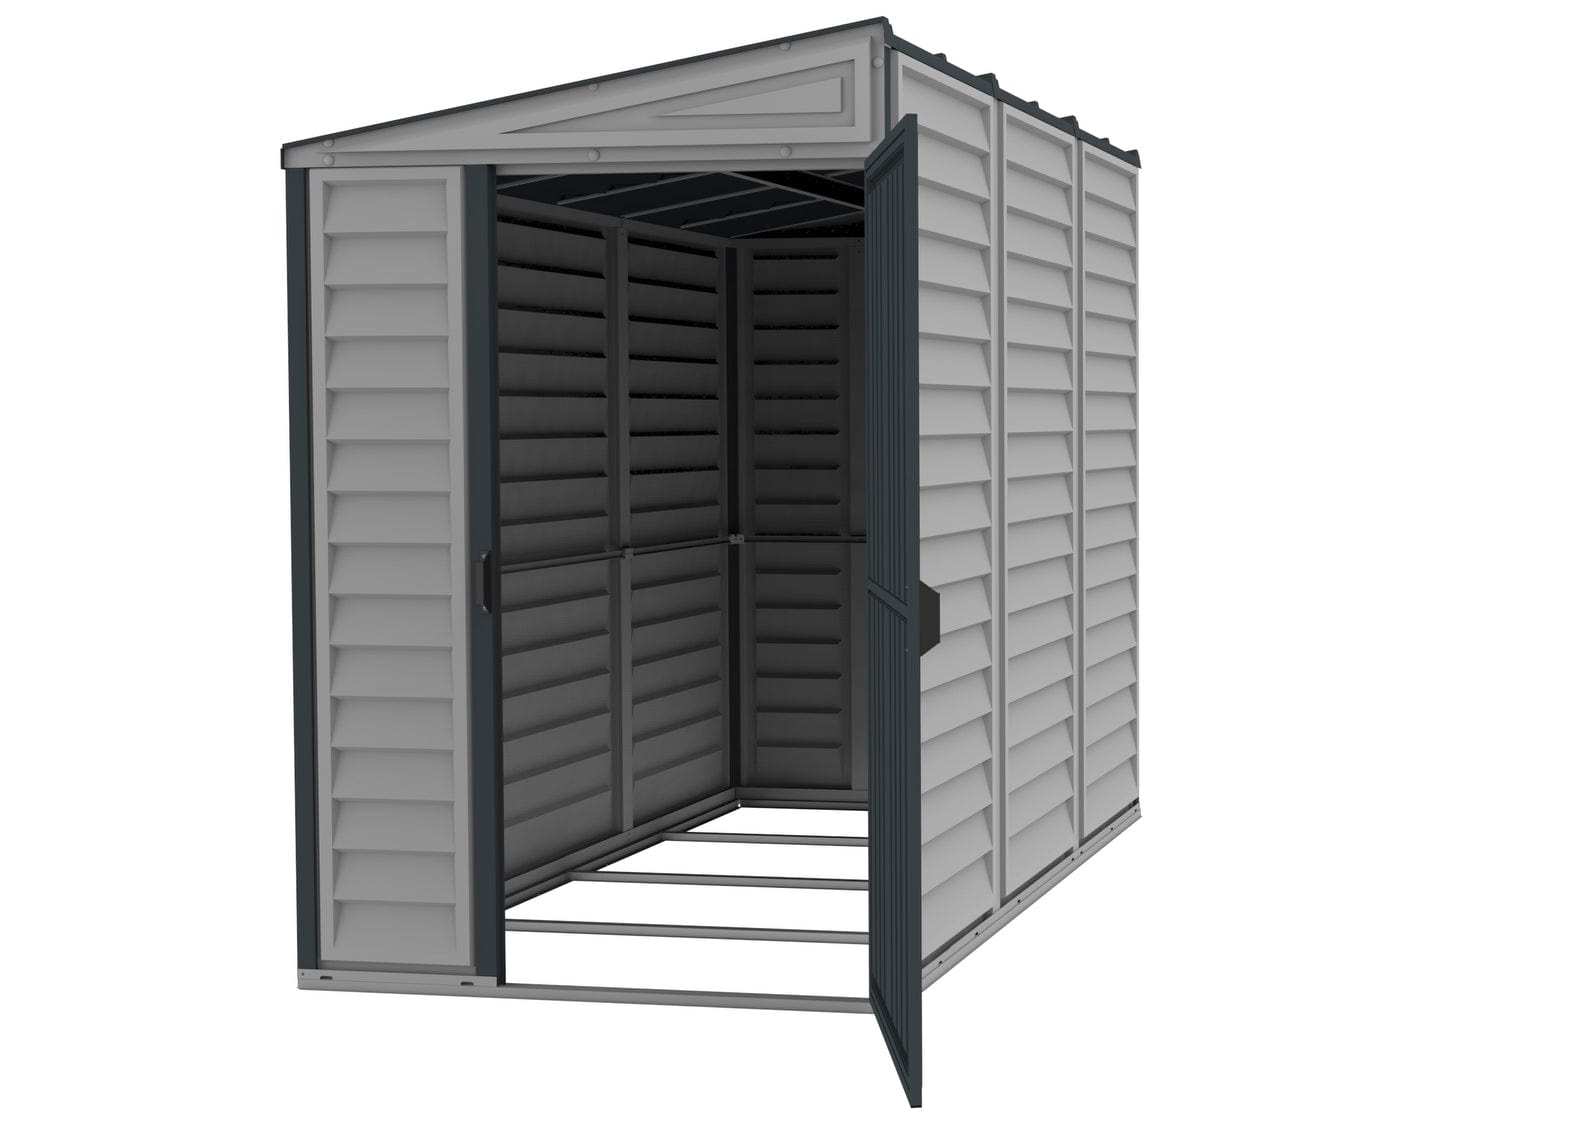 DuraMax Vinyl Shed 4x8 SideMate Plus with Foundation Kit